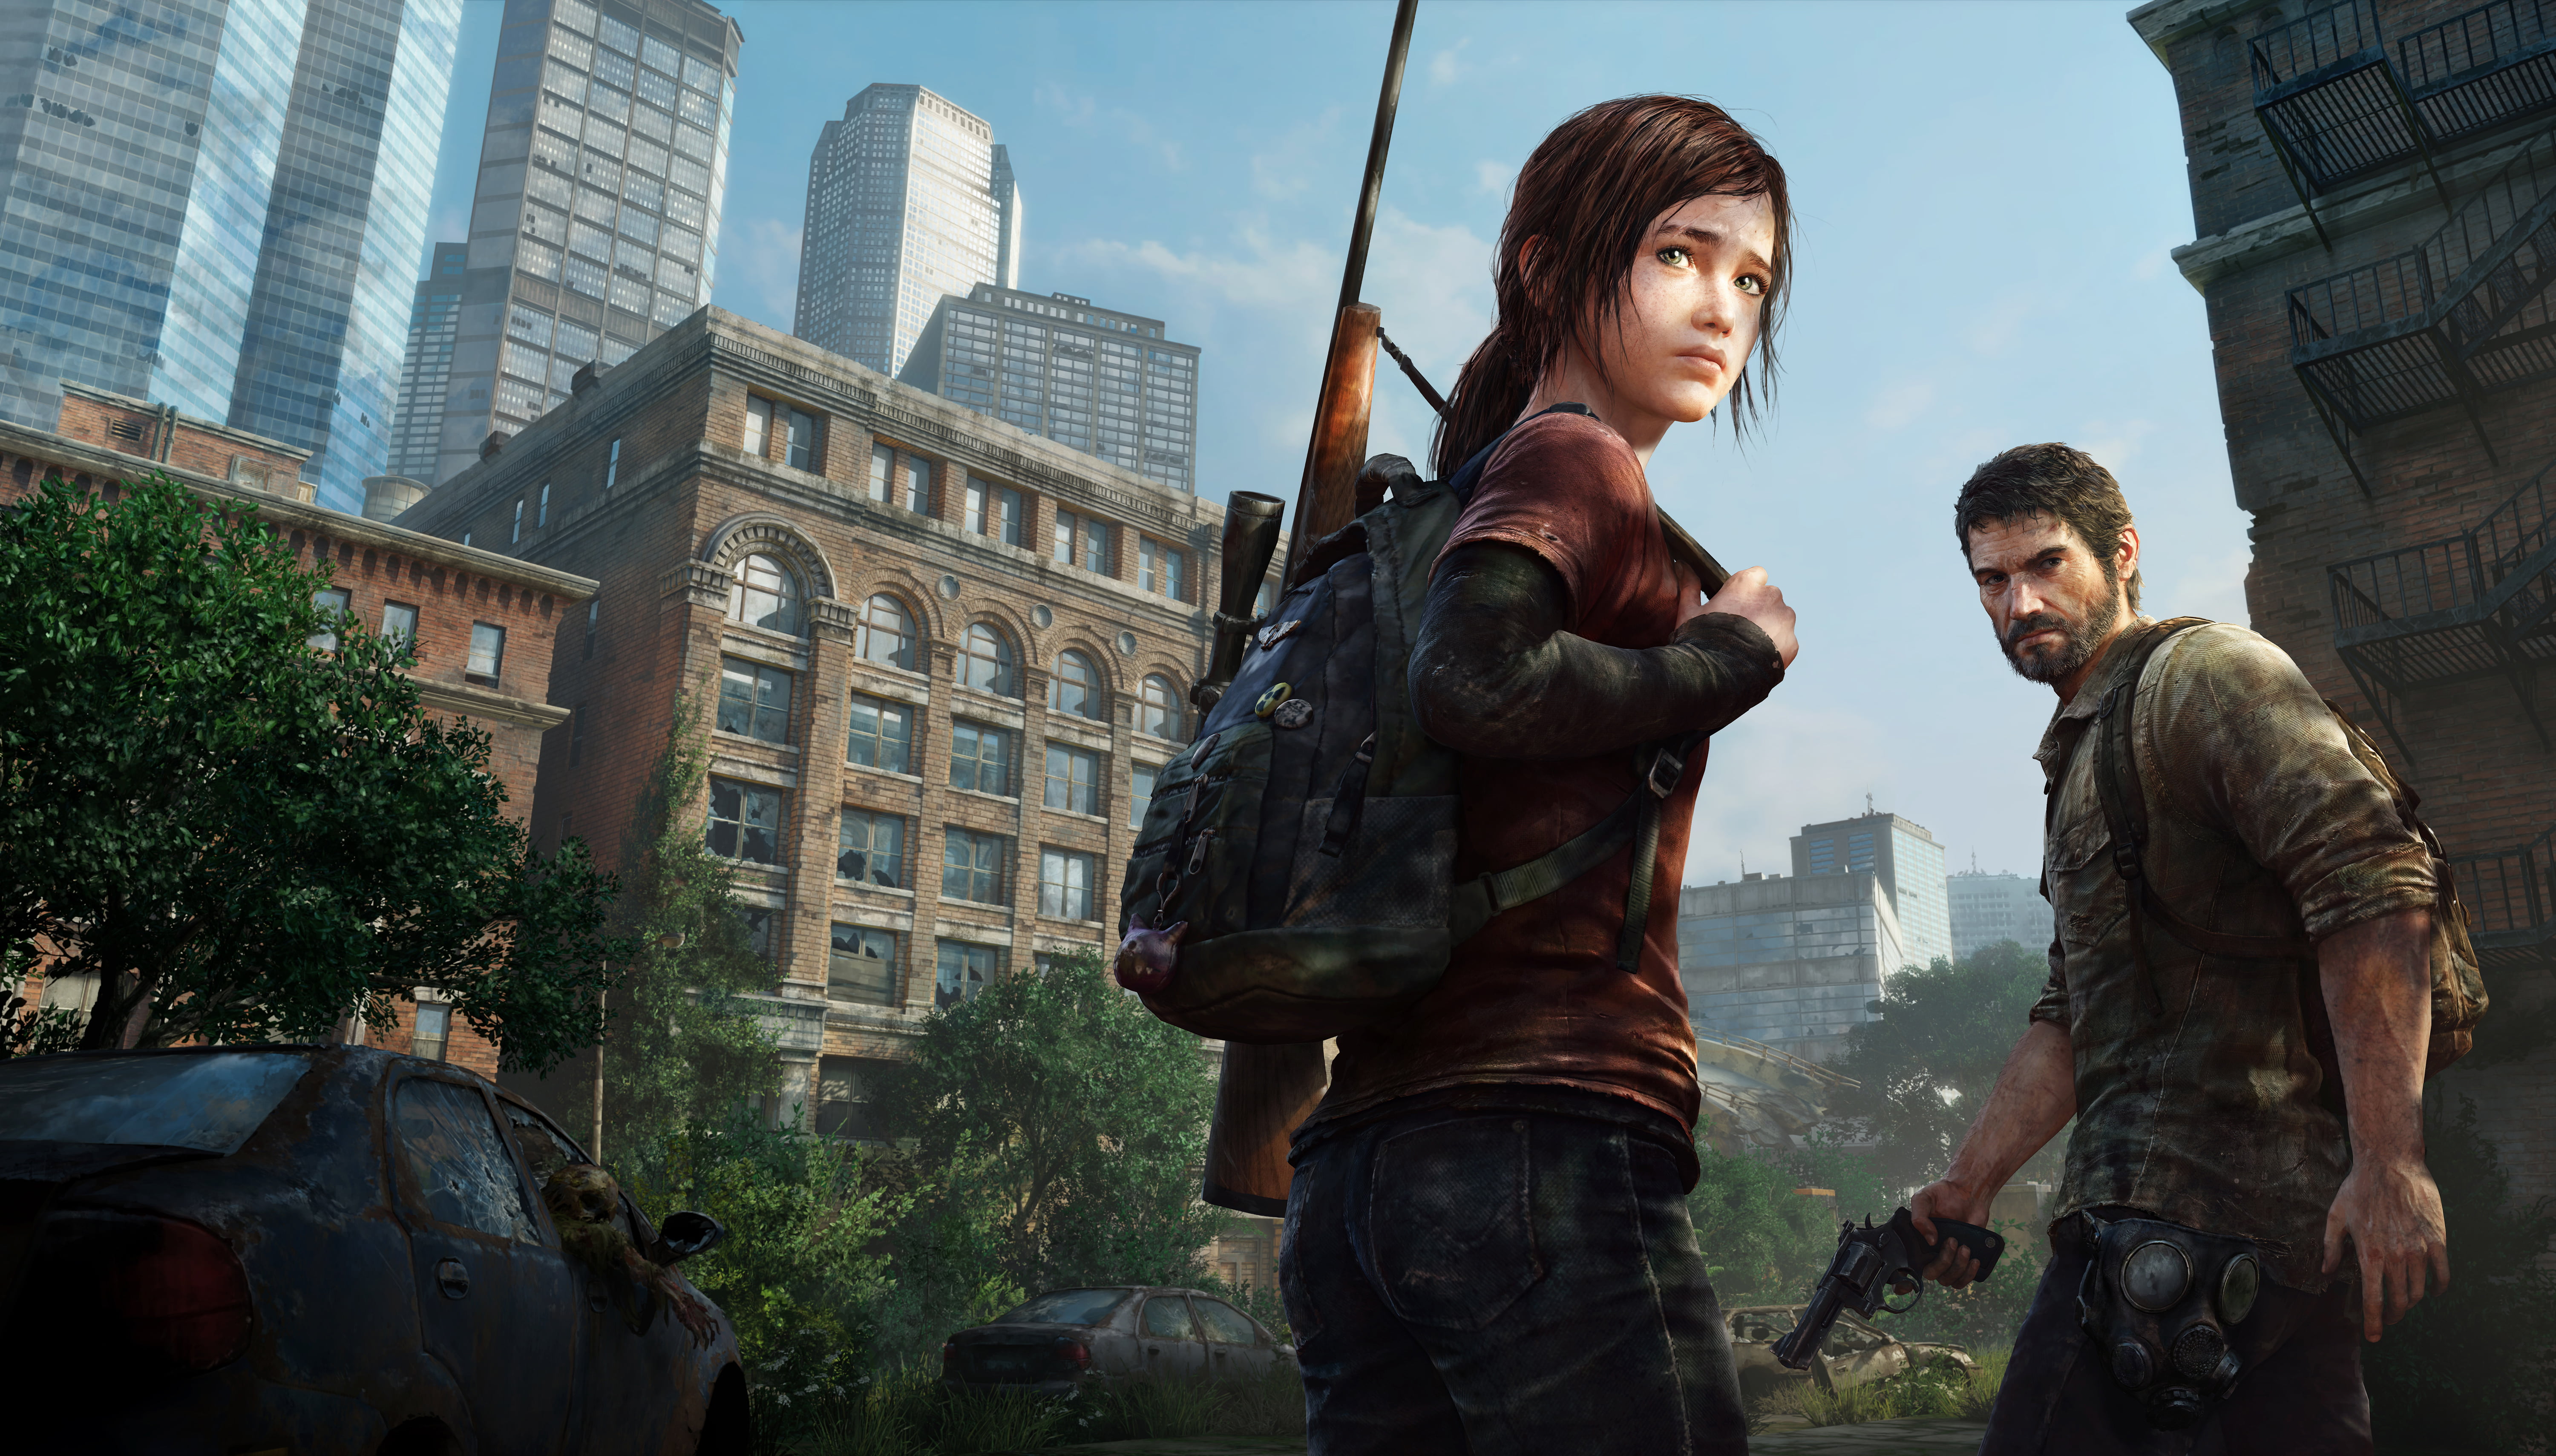 She to live there last year. The last of us. The last of us игра. Джоэл и Элли. Одни из нас (the last of us) ps4.